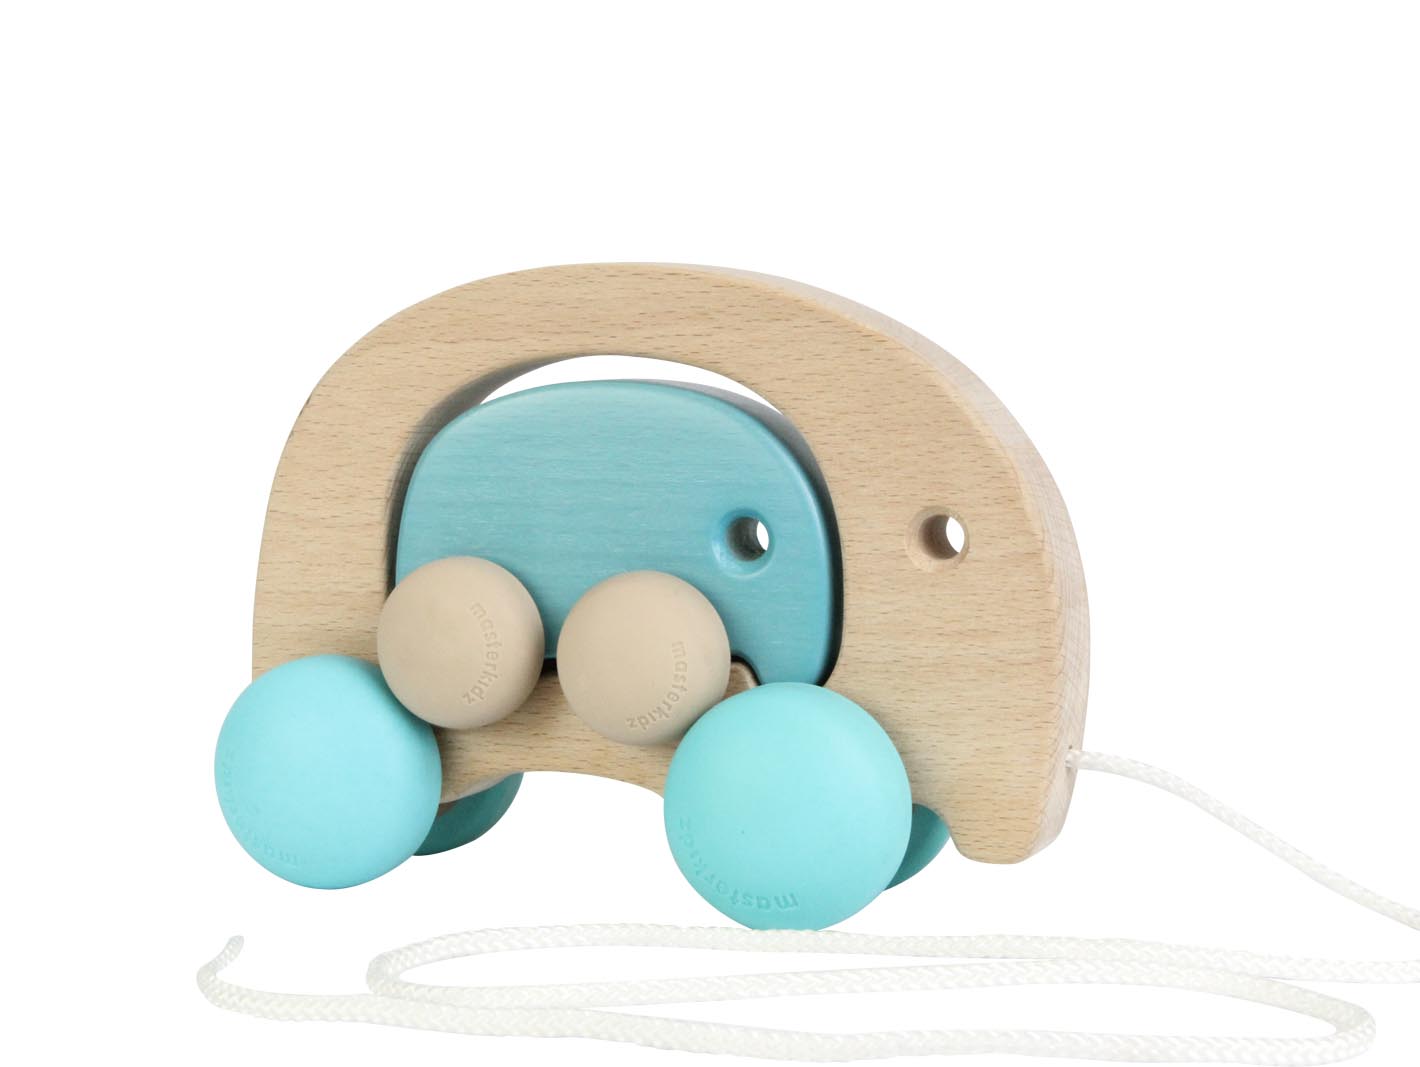 Bethd wooden push and pull two pieces of toys1